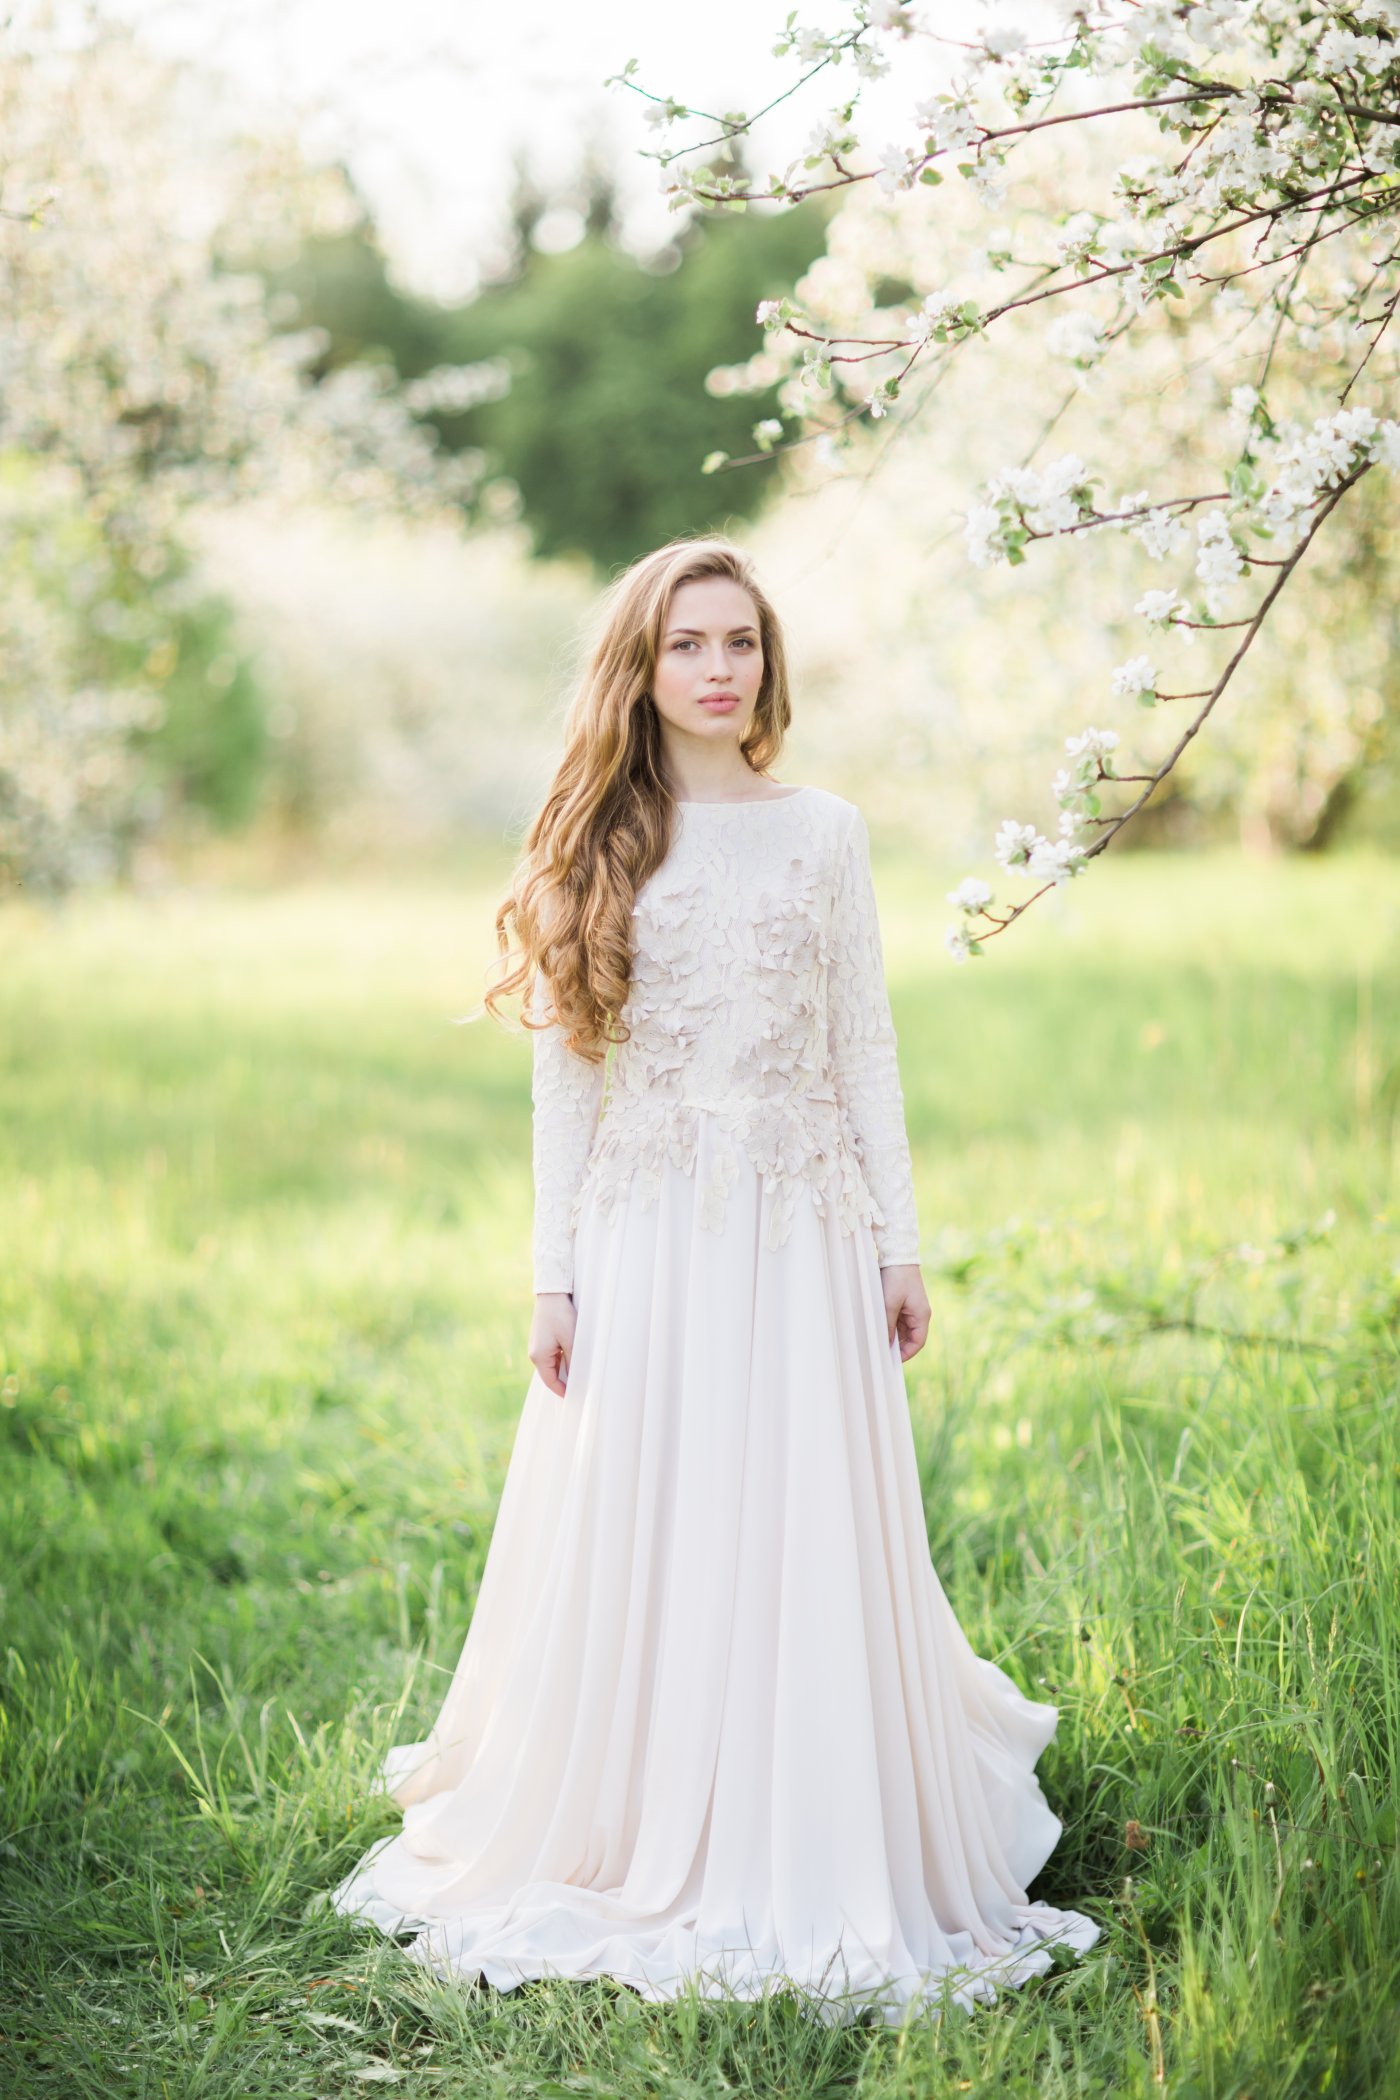 High-neck wedding dress with long sleeve and lace appliques floating ...